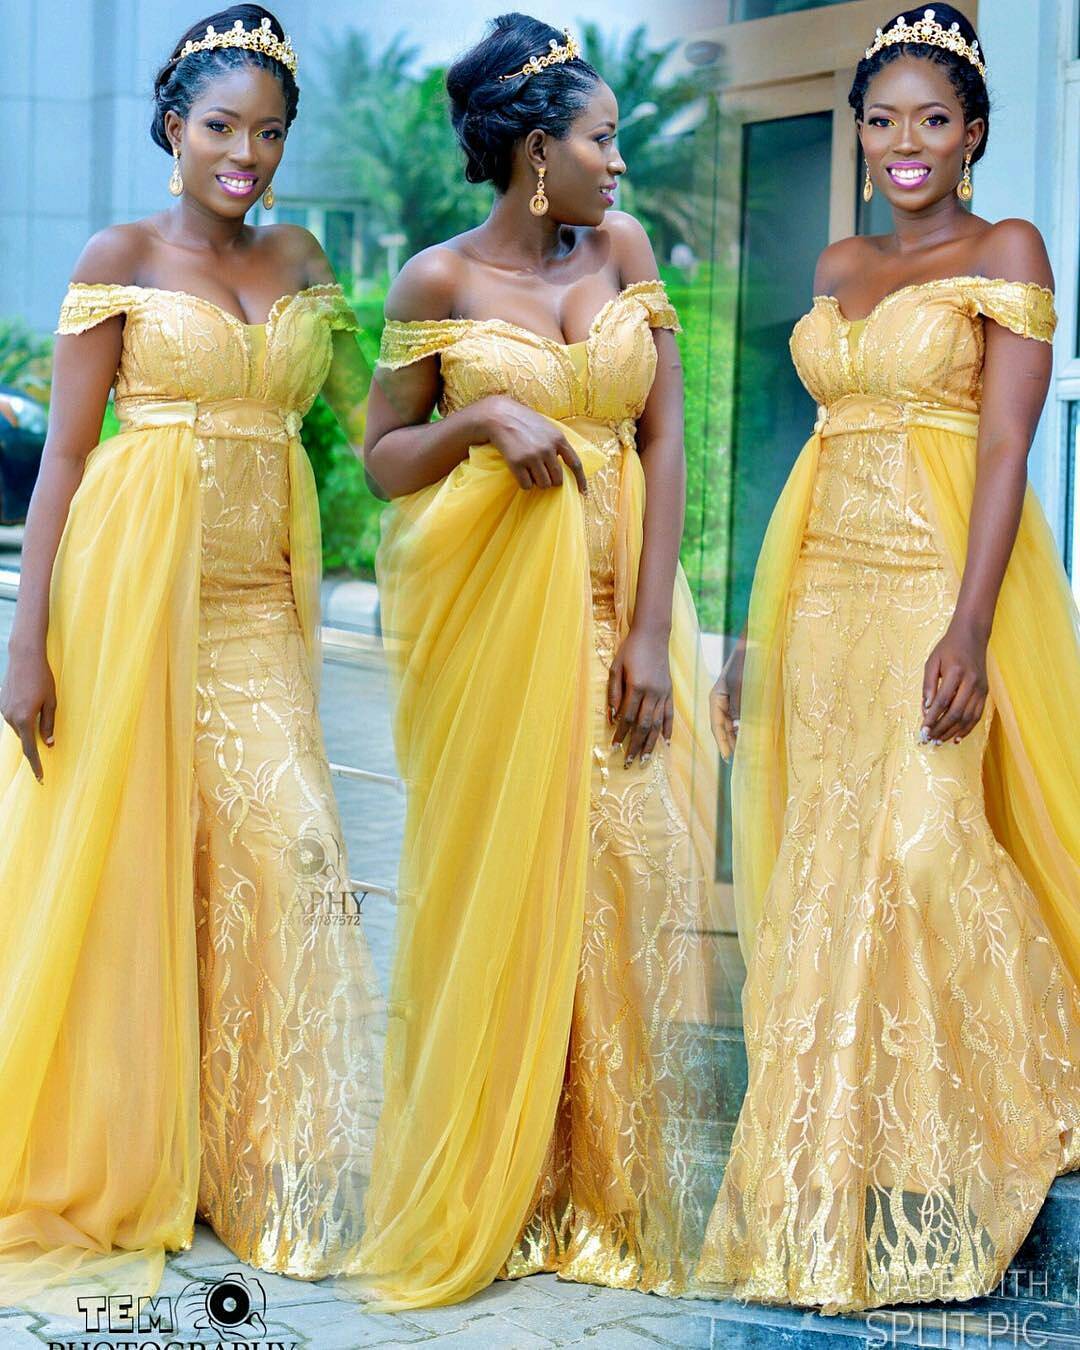 These Bridal Reception Gowns With Trains Are Lit!